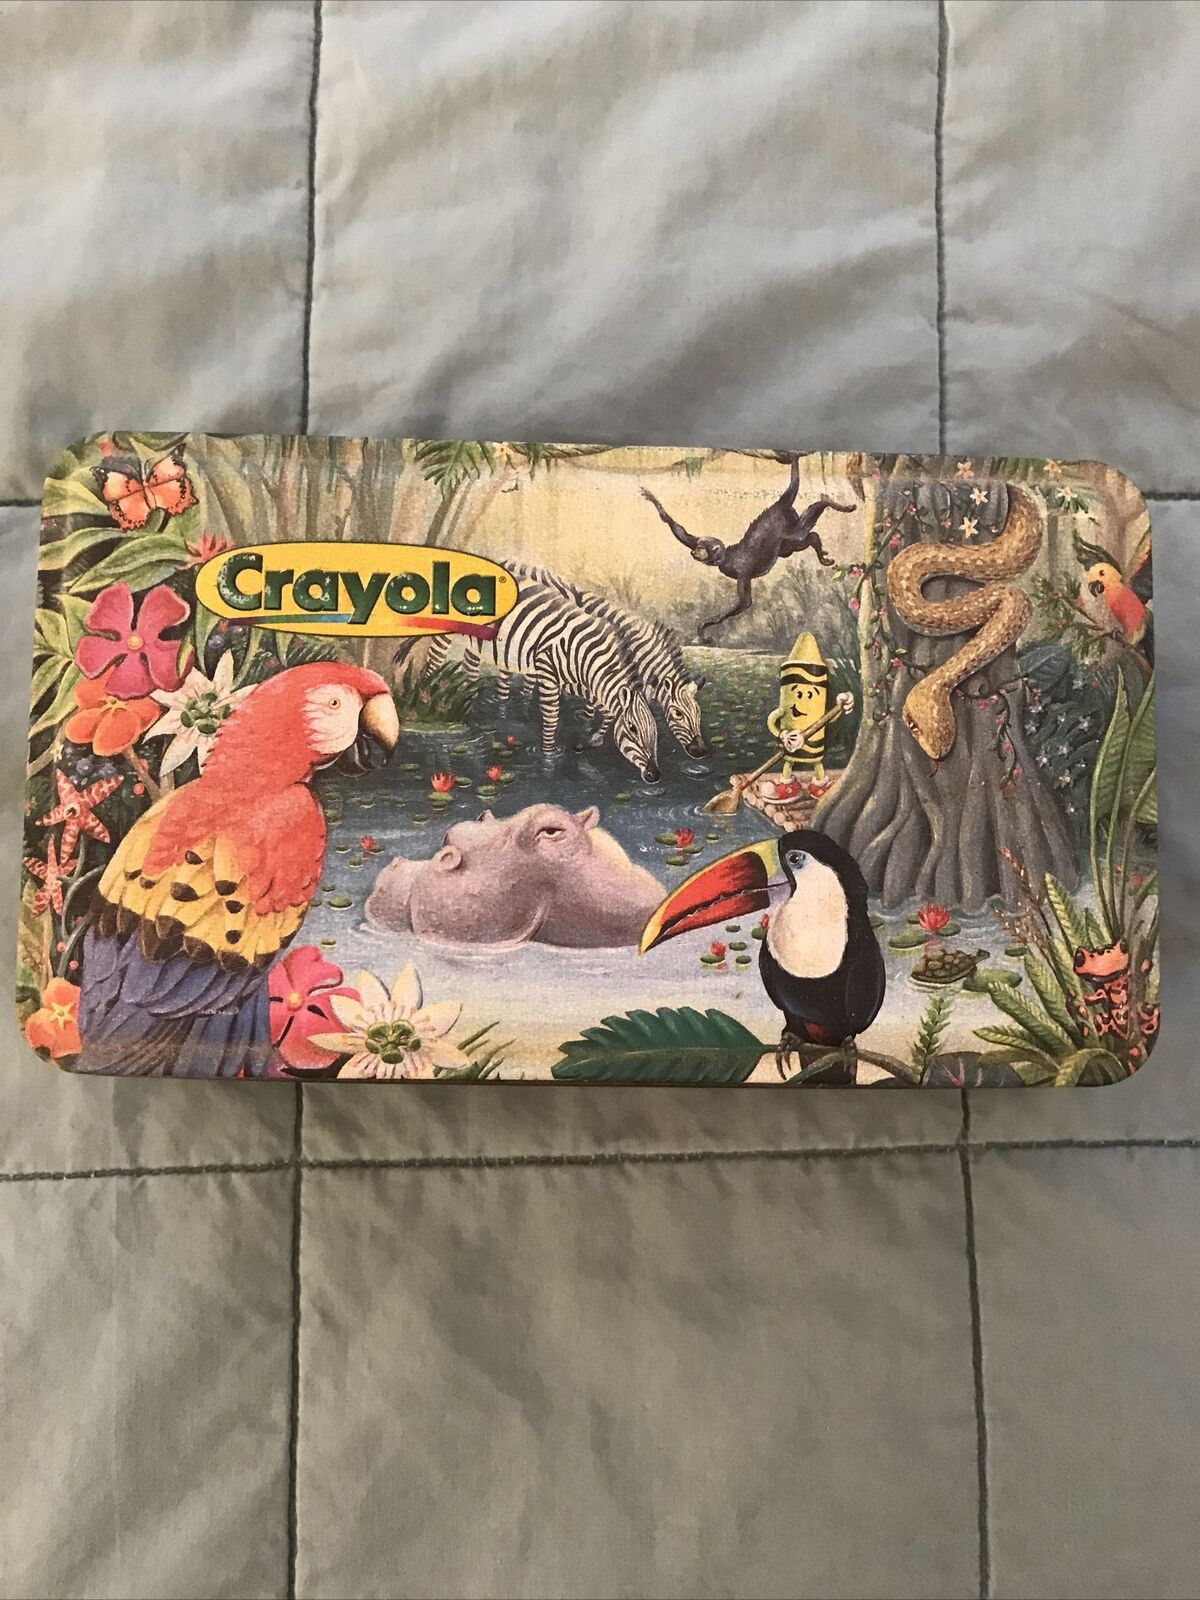 Crayola Discovery Tin: Series No. 1 "colorful Jungle" (1997)